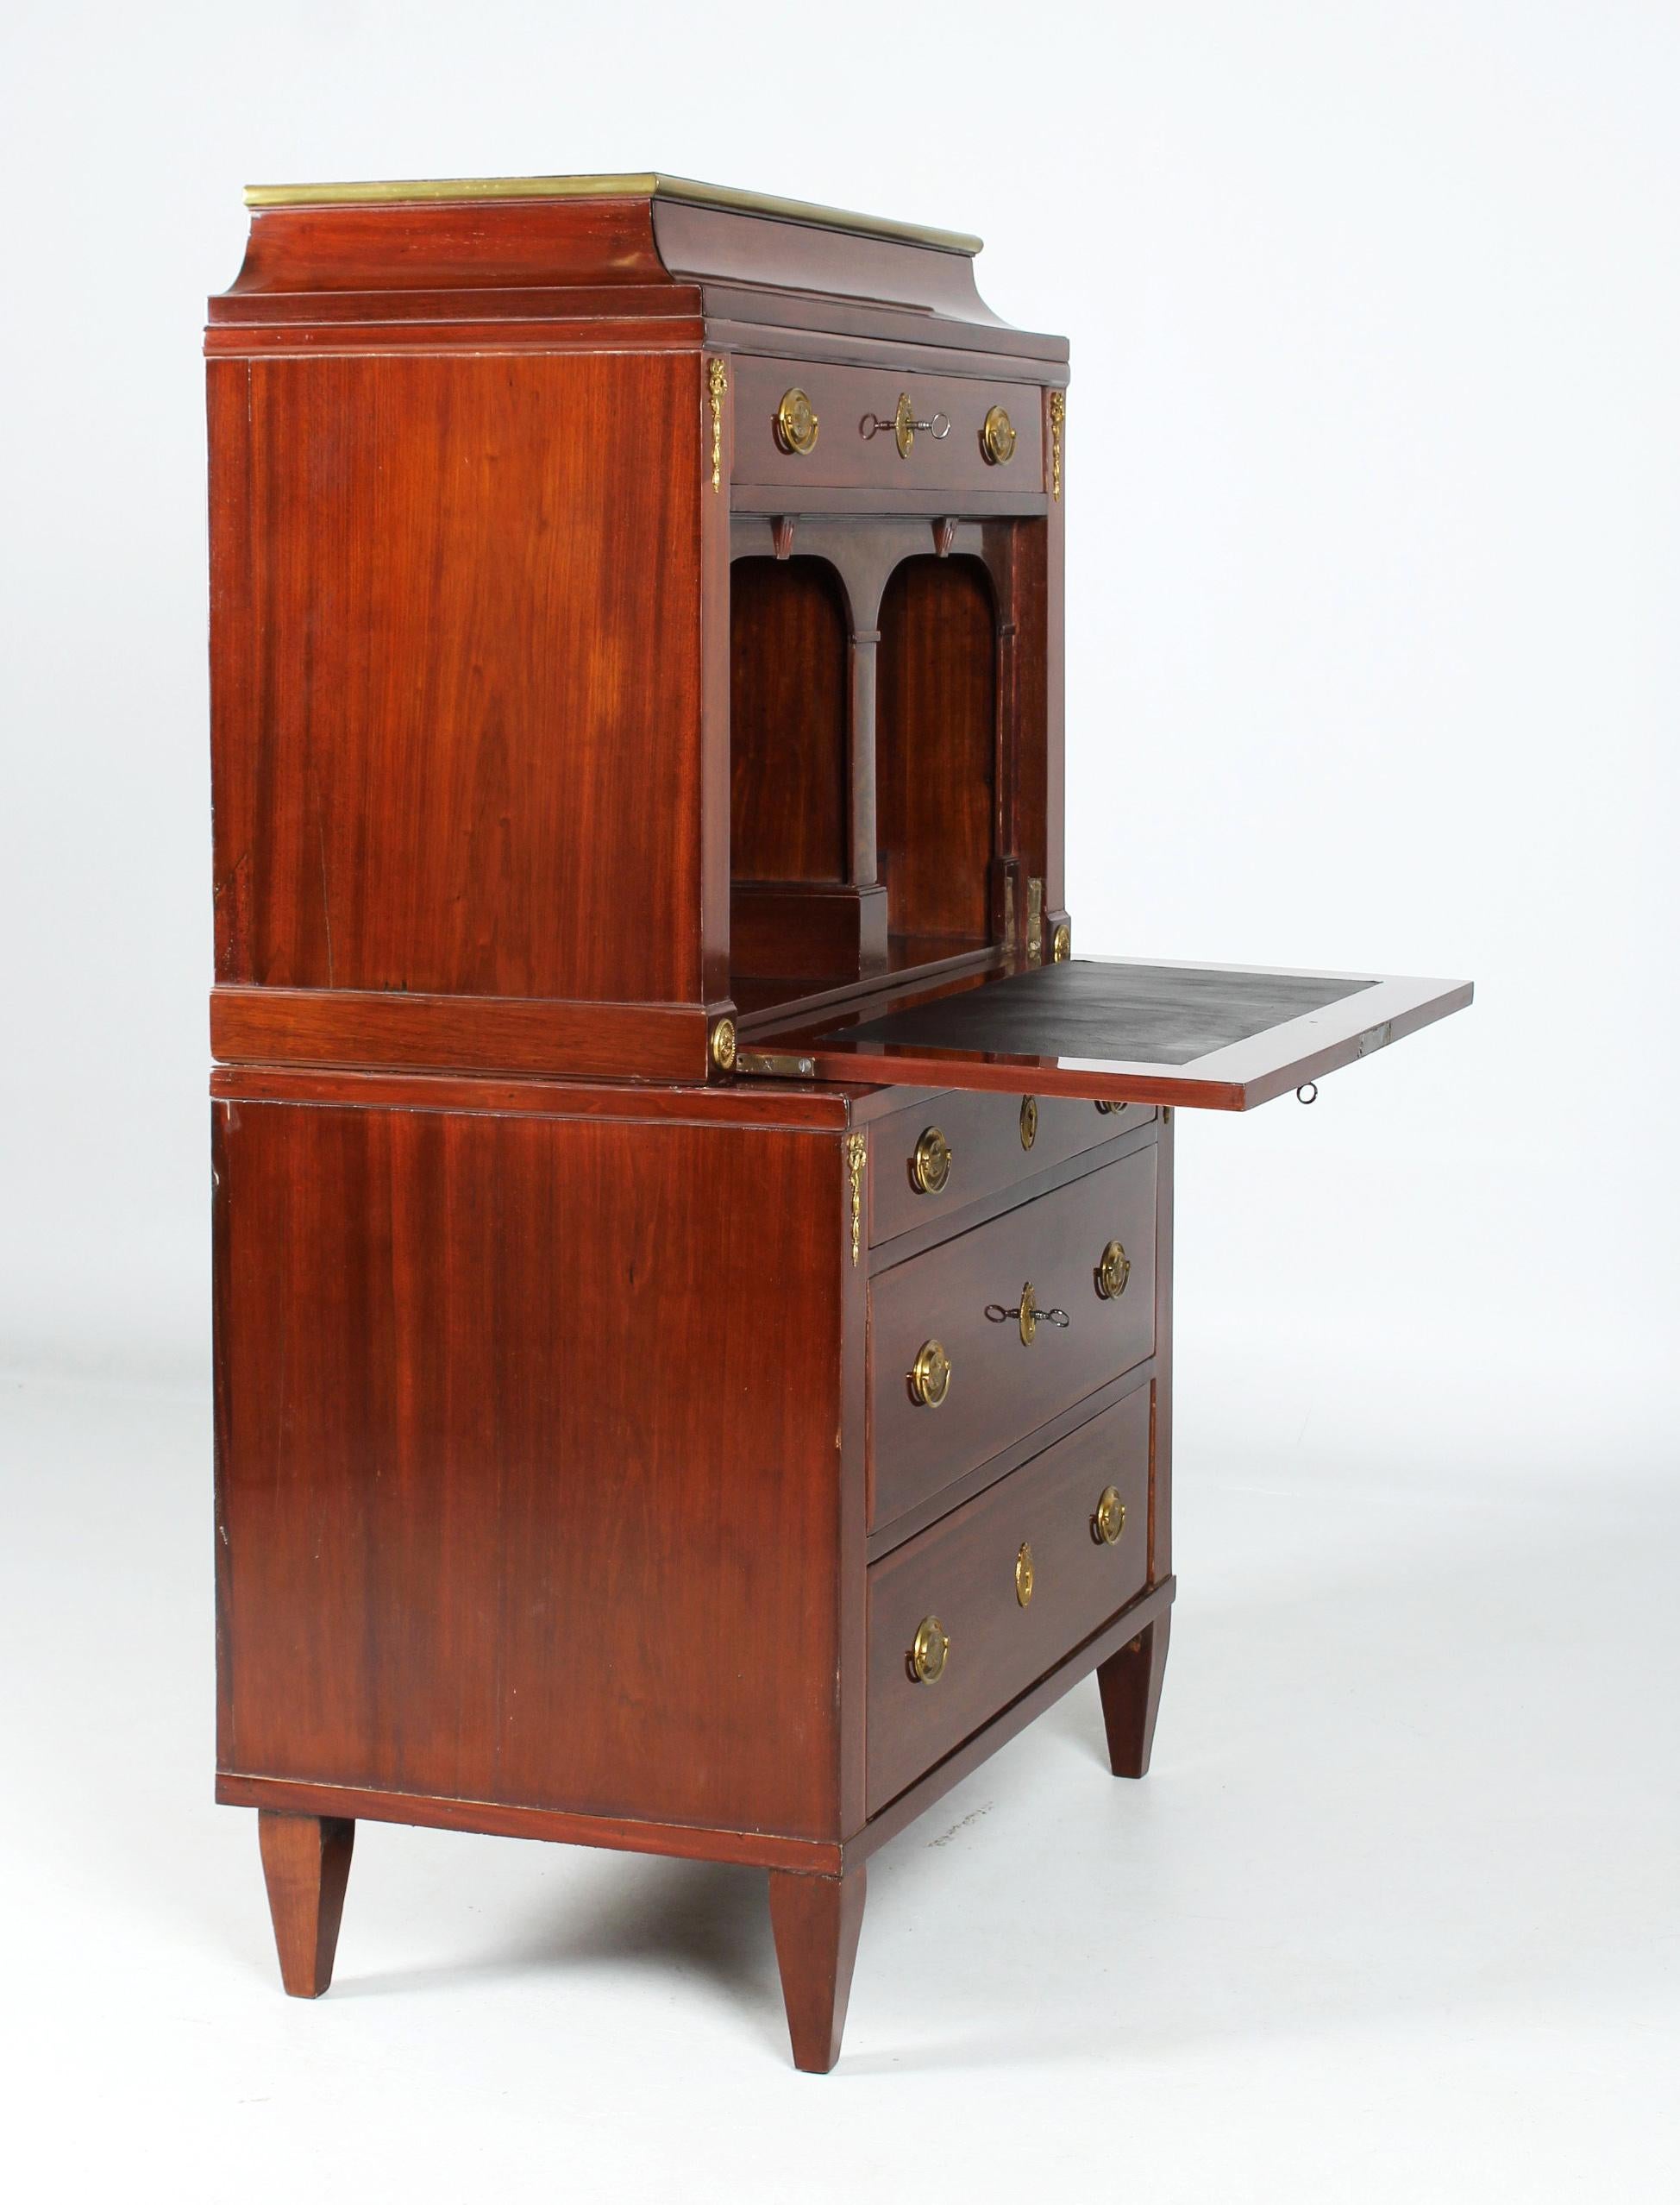 German Late 18th or Early 19th Century Secretary with Hidden Mechanisms, Mahogany For Sale